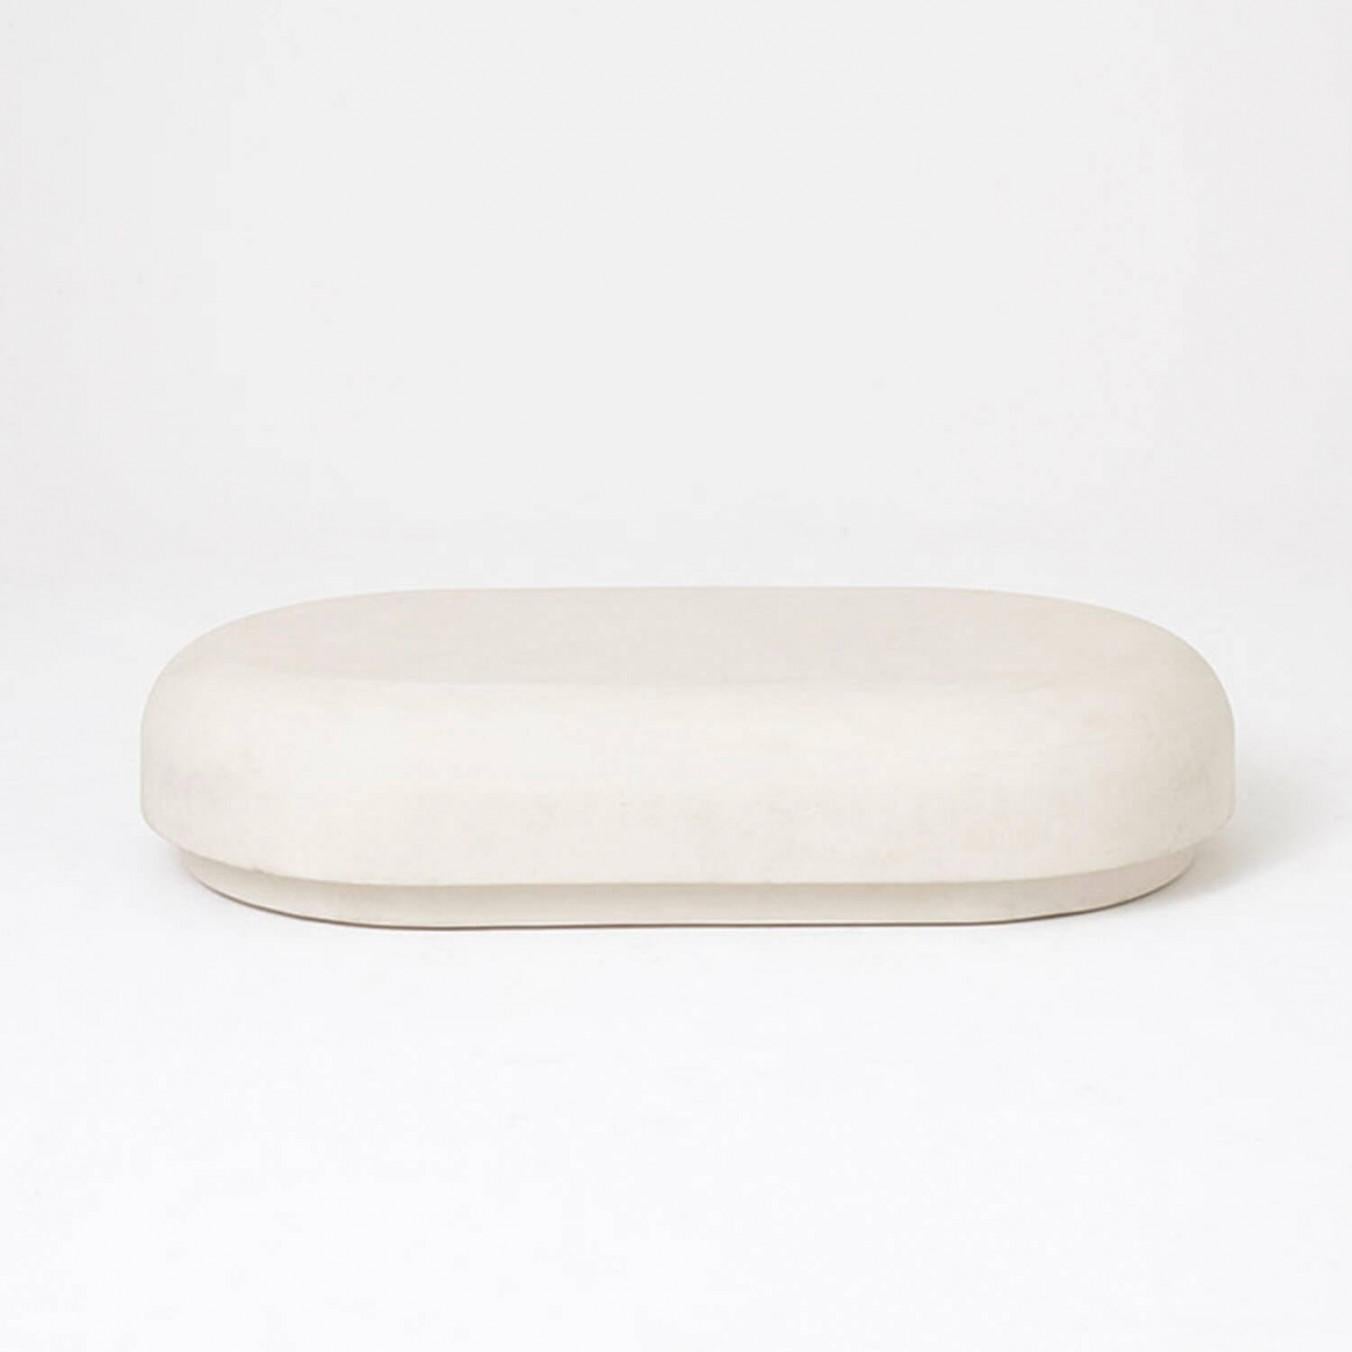 Contemporary cream plaster table - Roly Poly Low Table by Faye Toogood. 
This is shown in the cream plaster finish. 

Design: Faye Toogood
Material: Sealed Reinforced Plaster
Available also in chalk, storm or charcoal finish, please contact